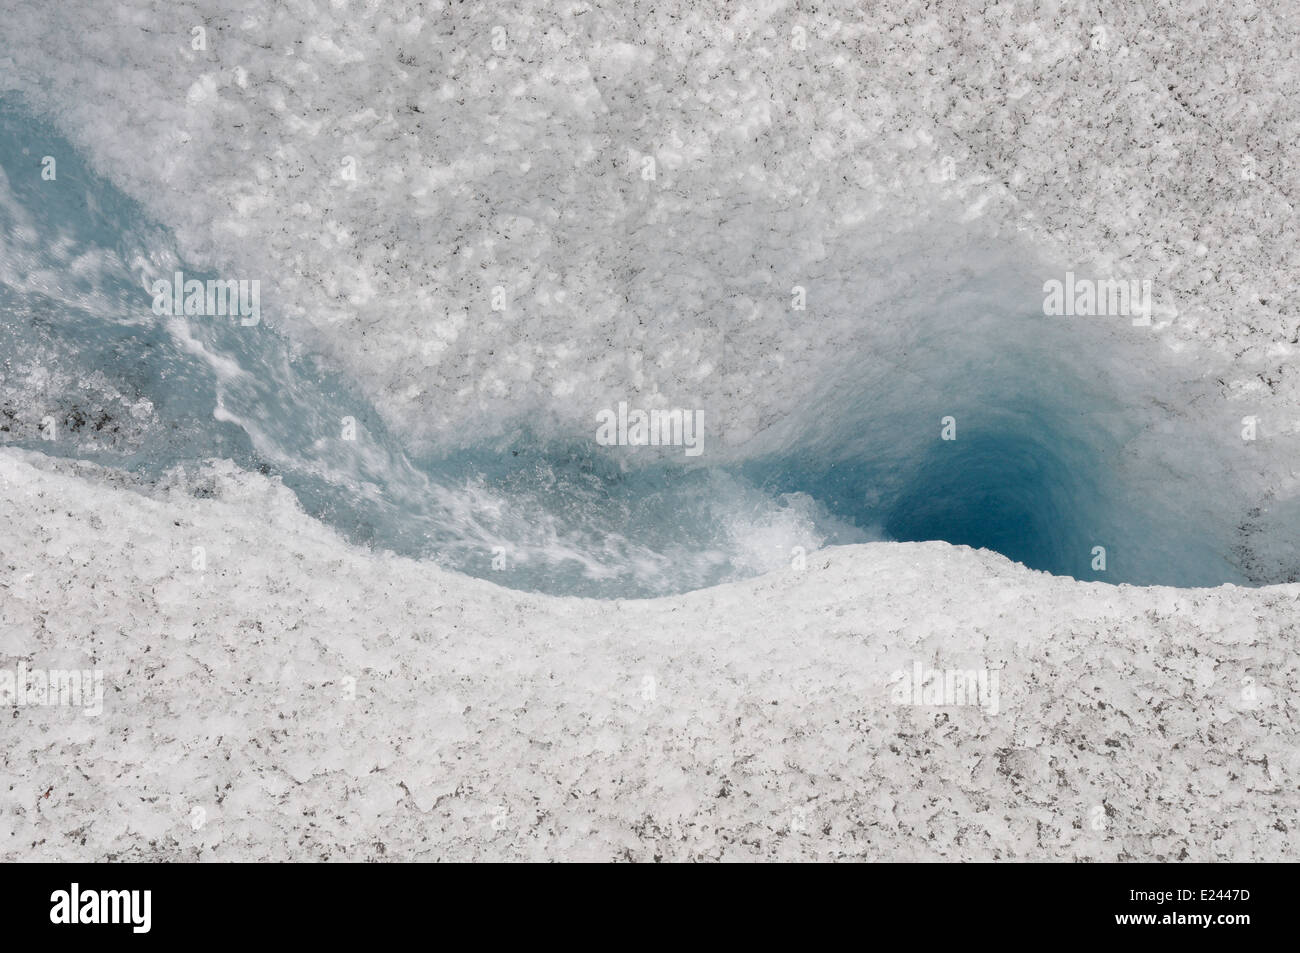 A moulin on the Ferpecle glacier in the swiss alps Stock Photo